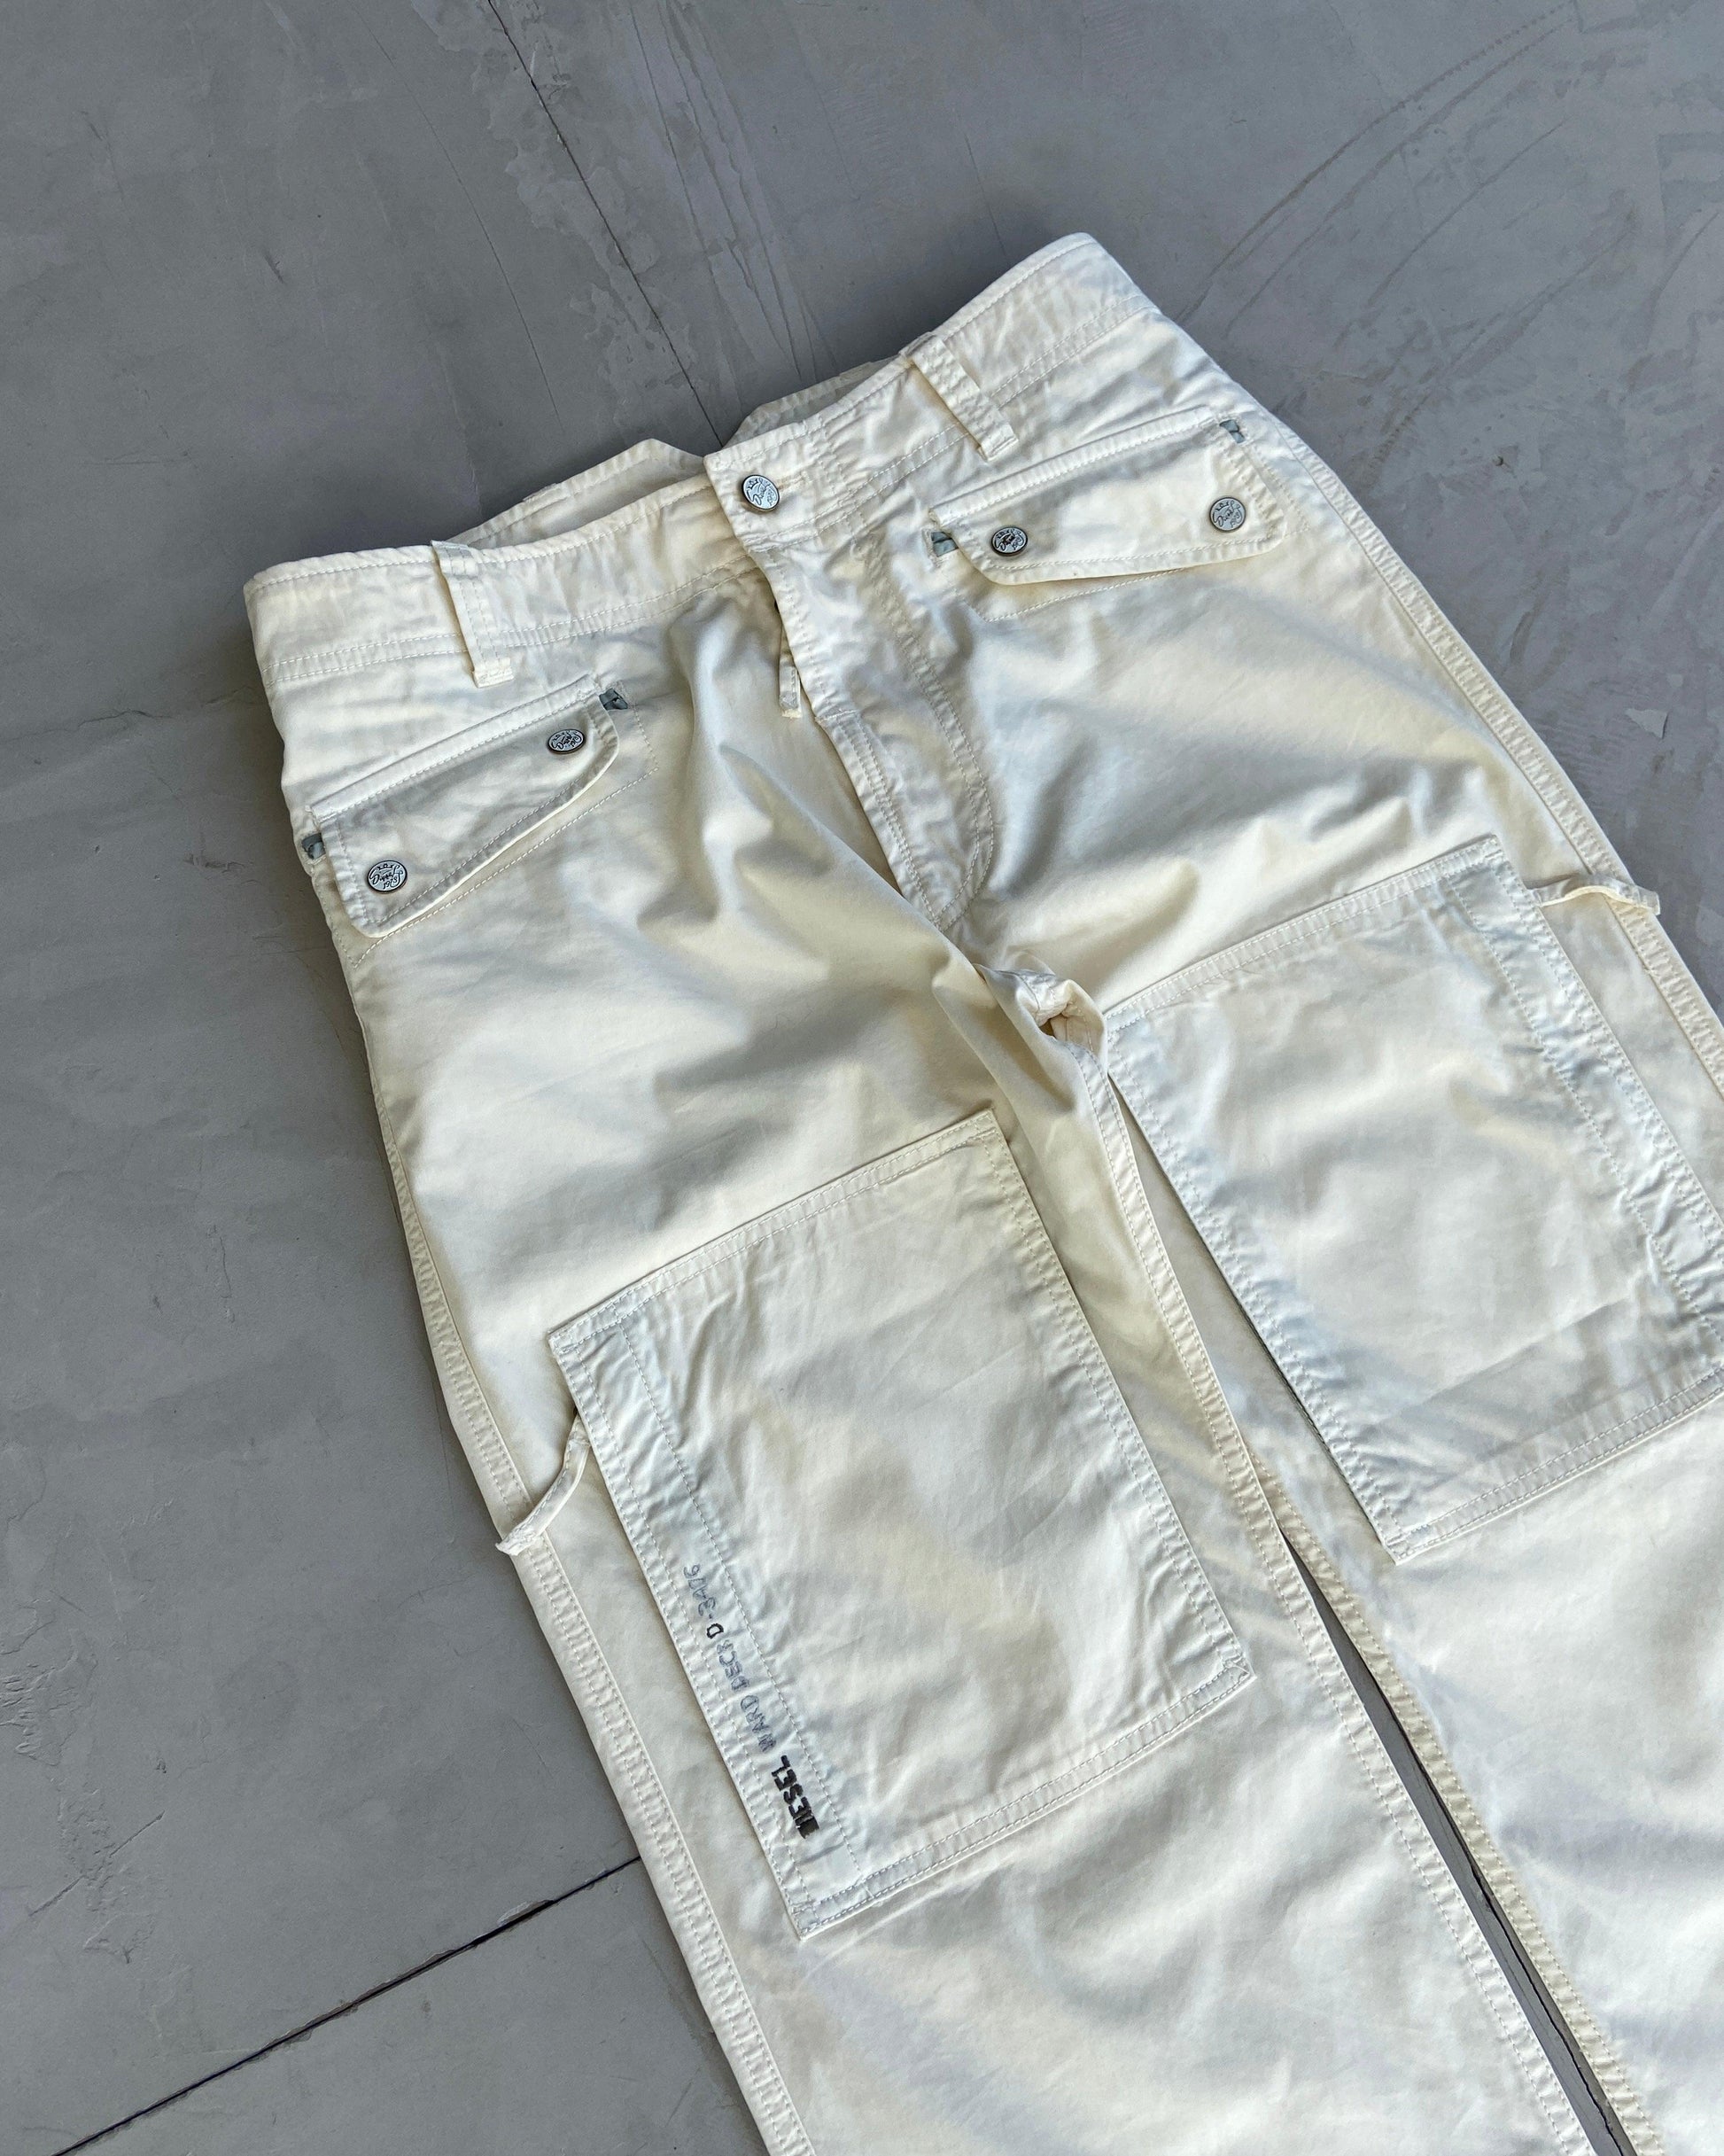 DIESEL 2000'S CREAM CARGO TROUSERS - W29" - Known Source